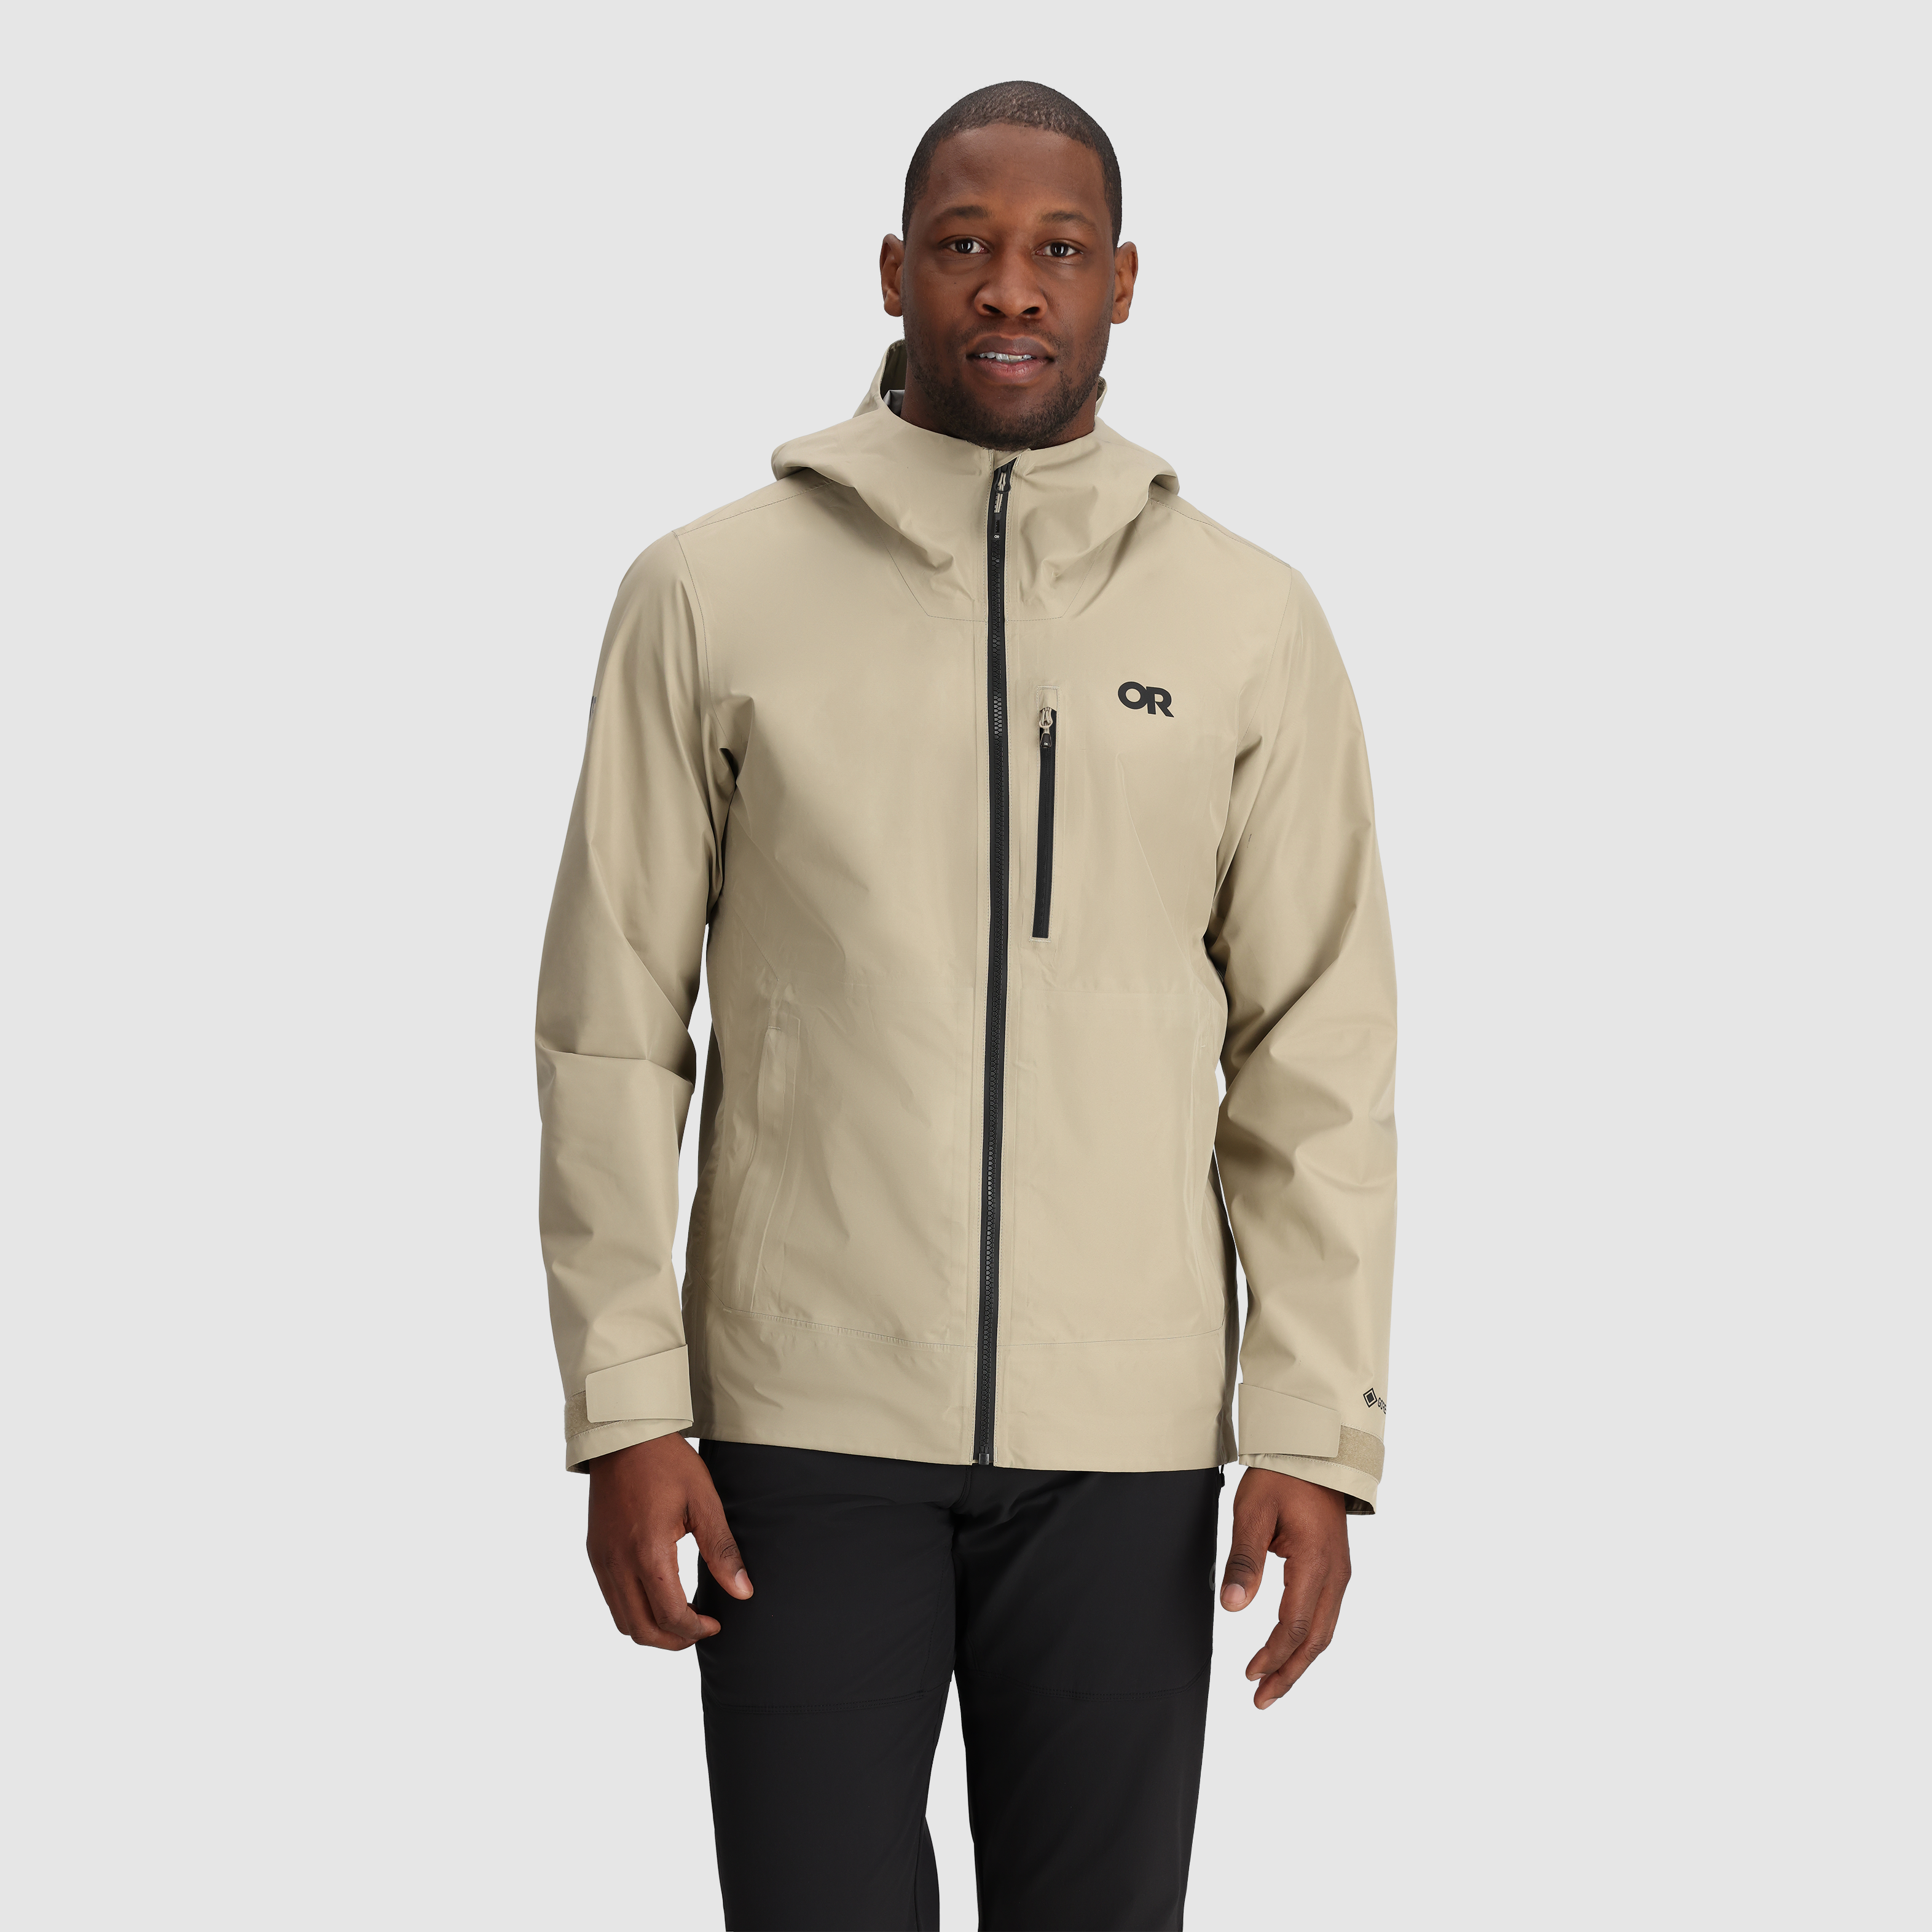 Outdoor Research Men's Foray Jacket – Campmor